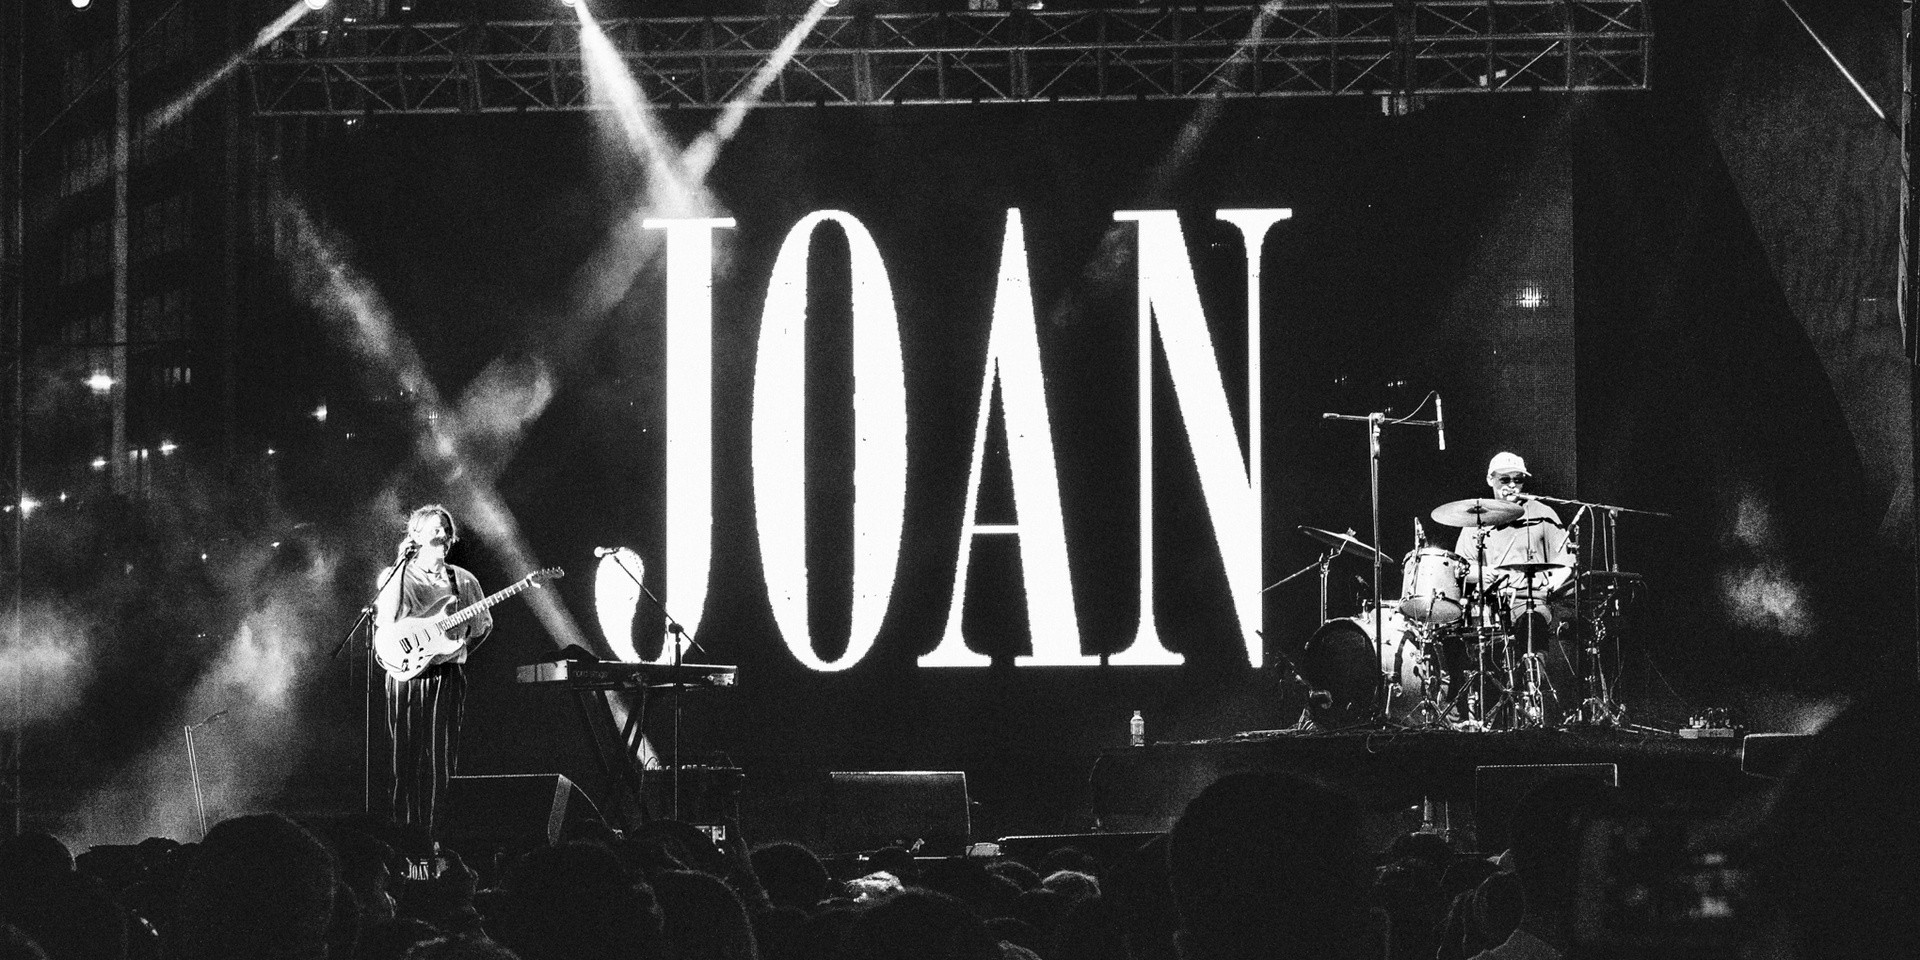 Roll Call with Joan